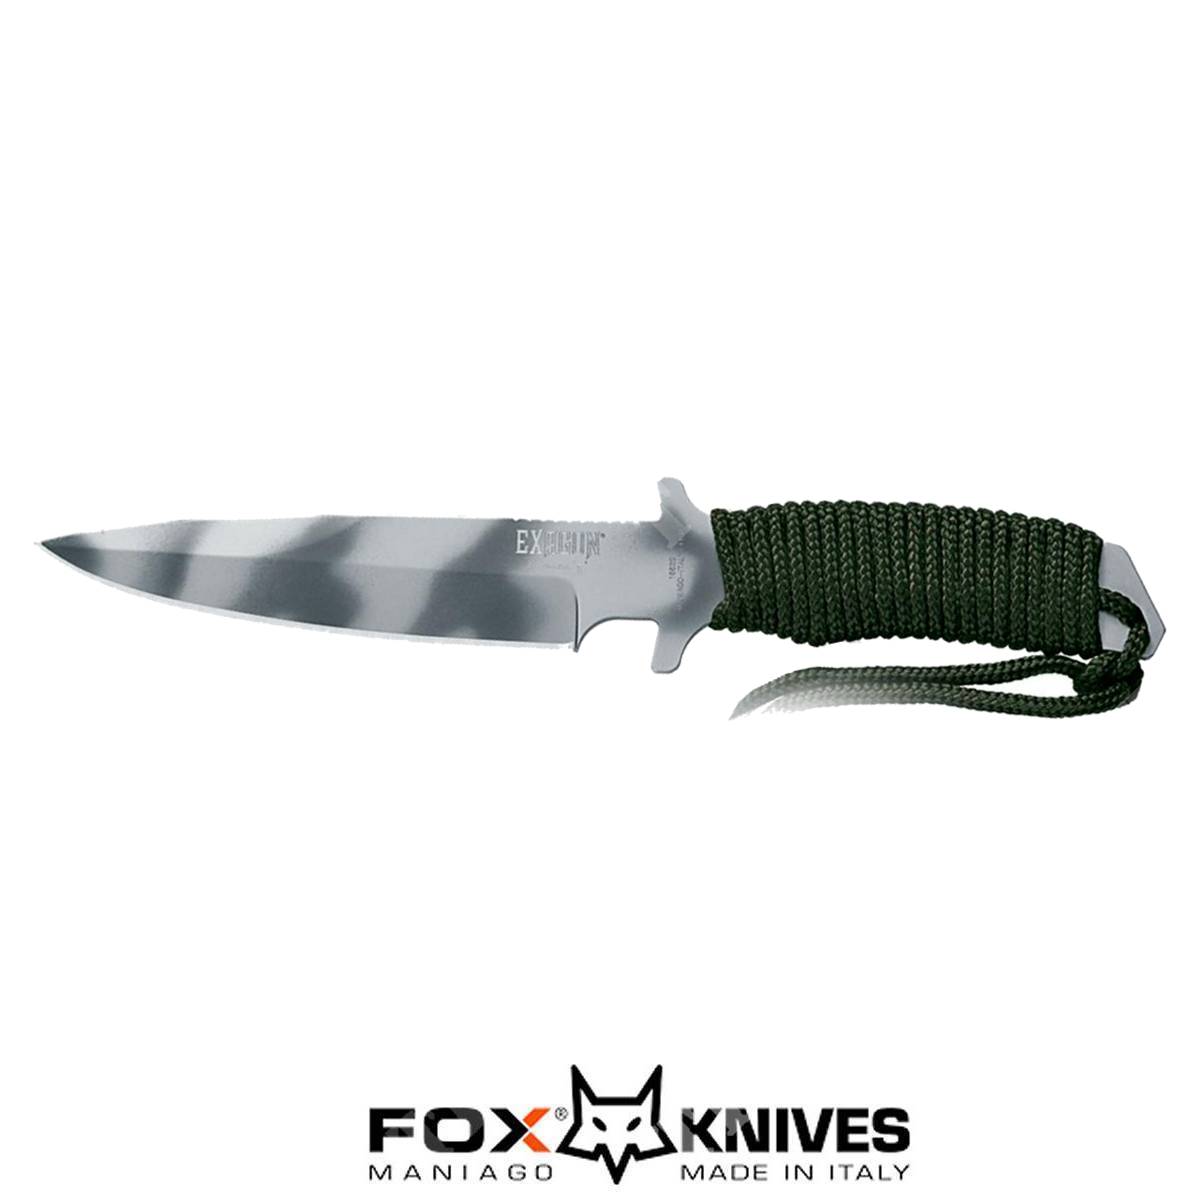 Exagon attack camouflage fox knife (1662s): Hunting models for